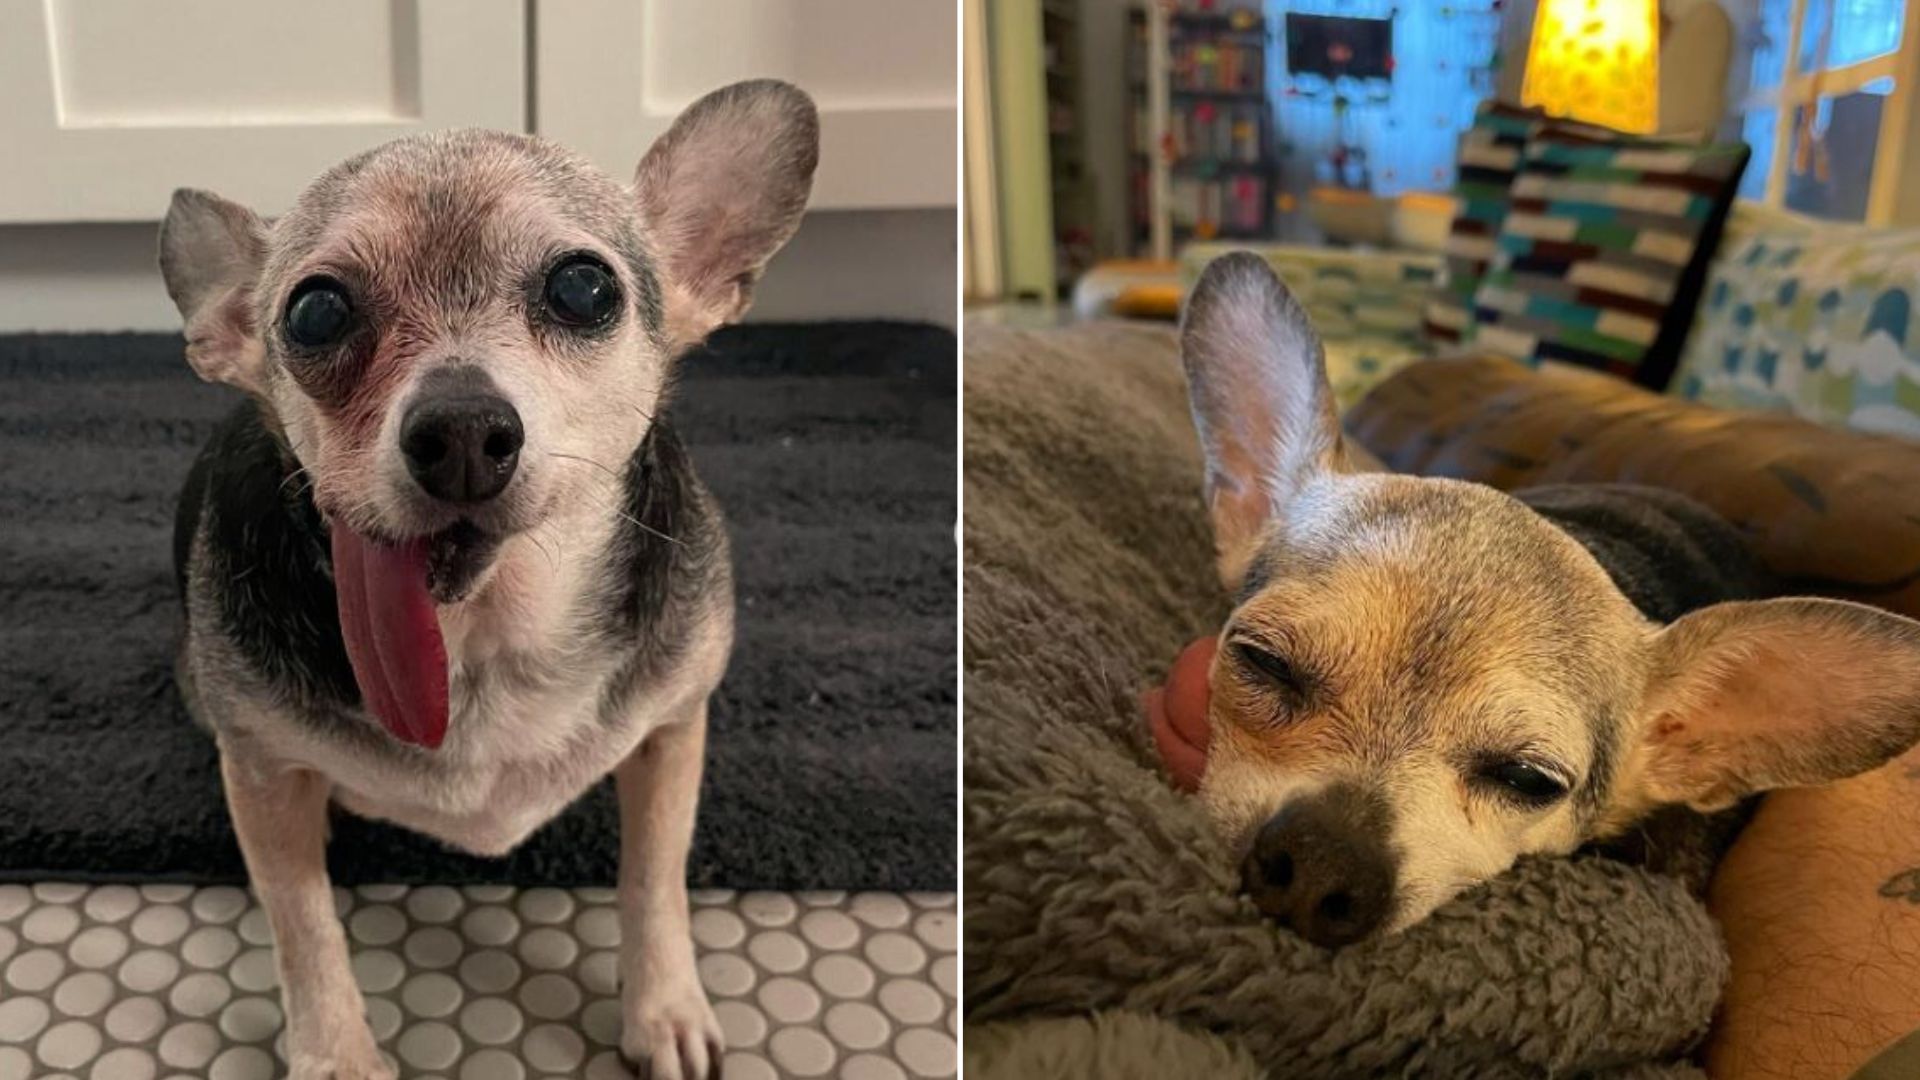 This Senior Chihuahua’s Pawdorable Habit Will Brighten Your Day